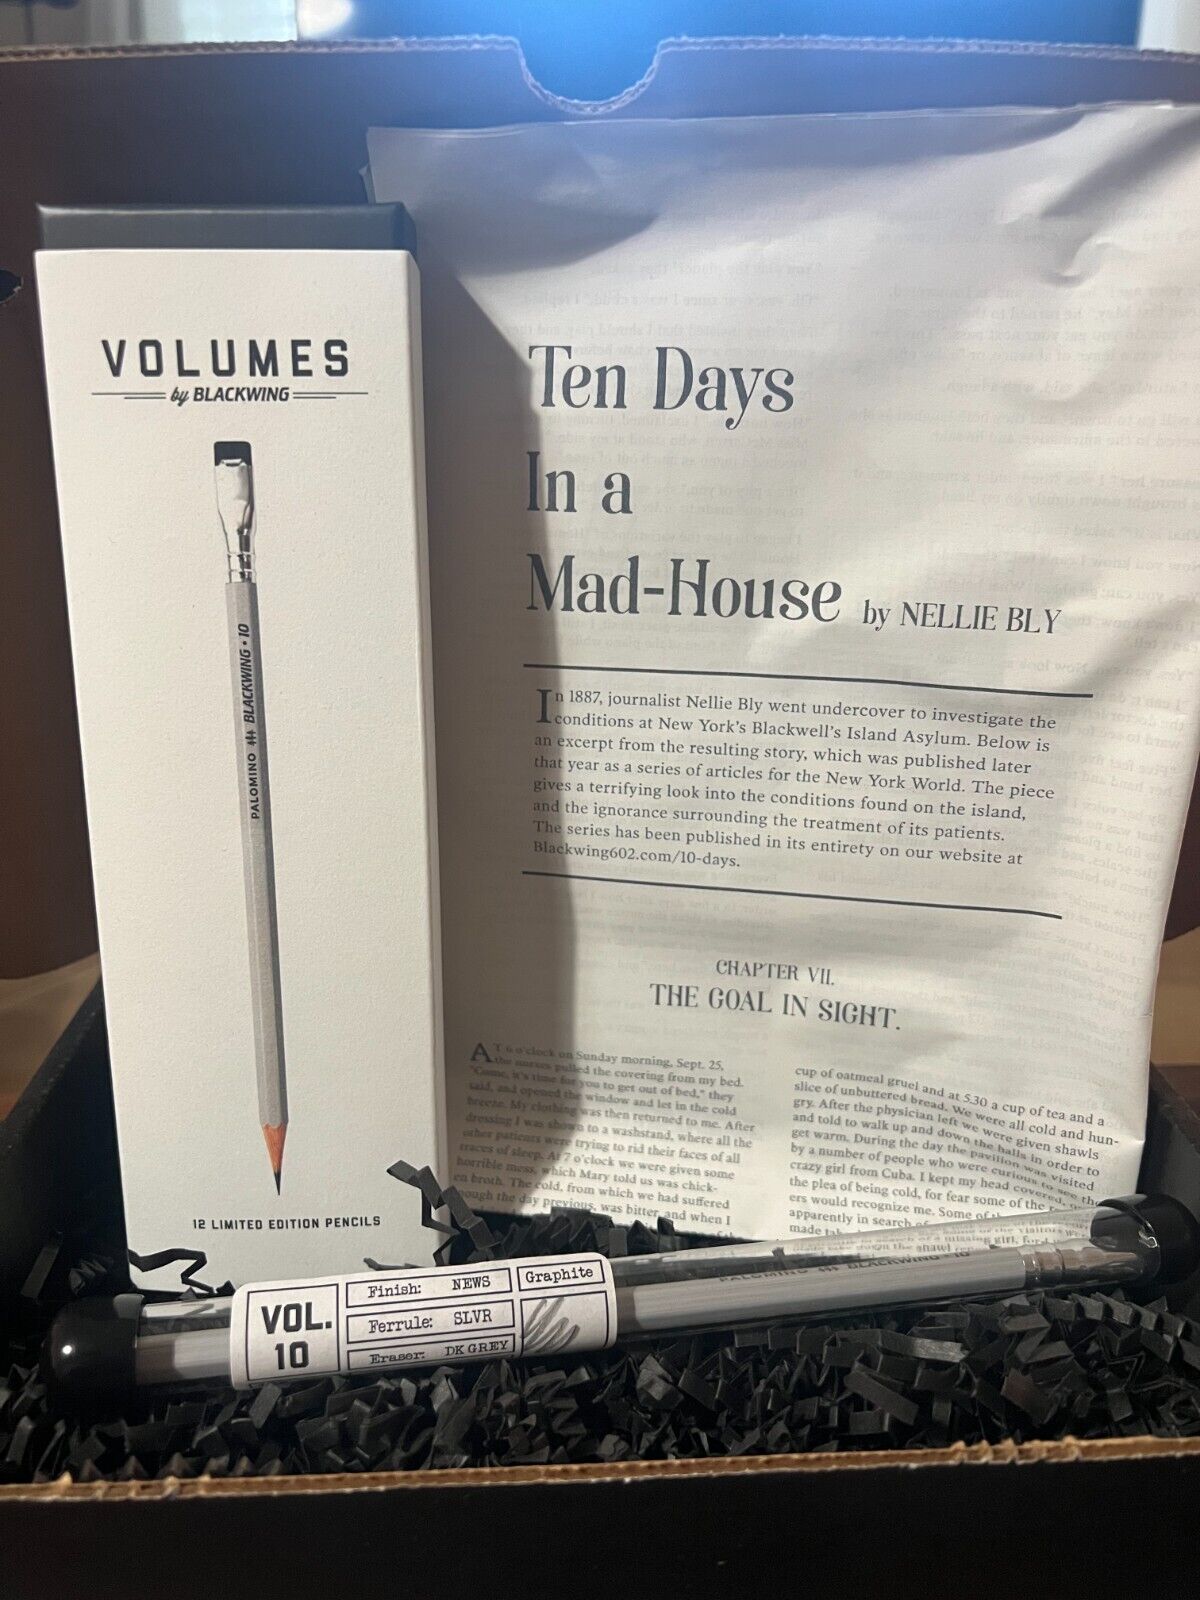 Blackwing Volume 10 Complete Subscriber Box - Nellie Bly Pencil 